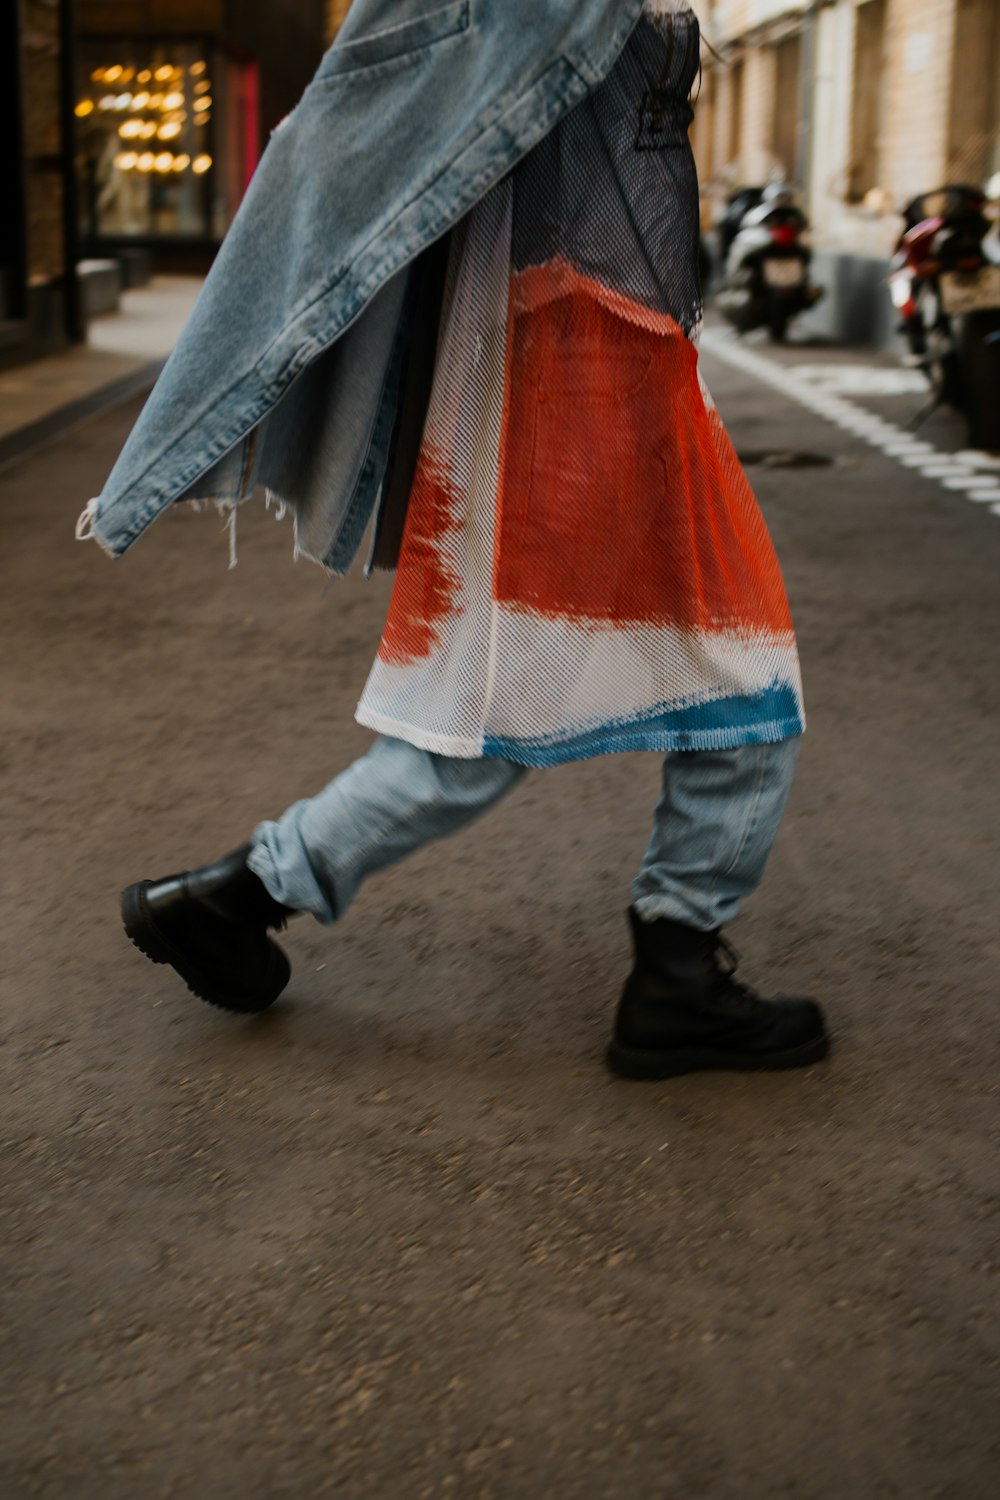 a person walking down a street carrying a jacket